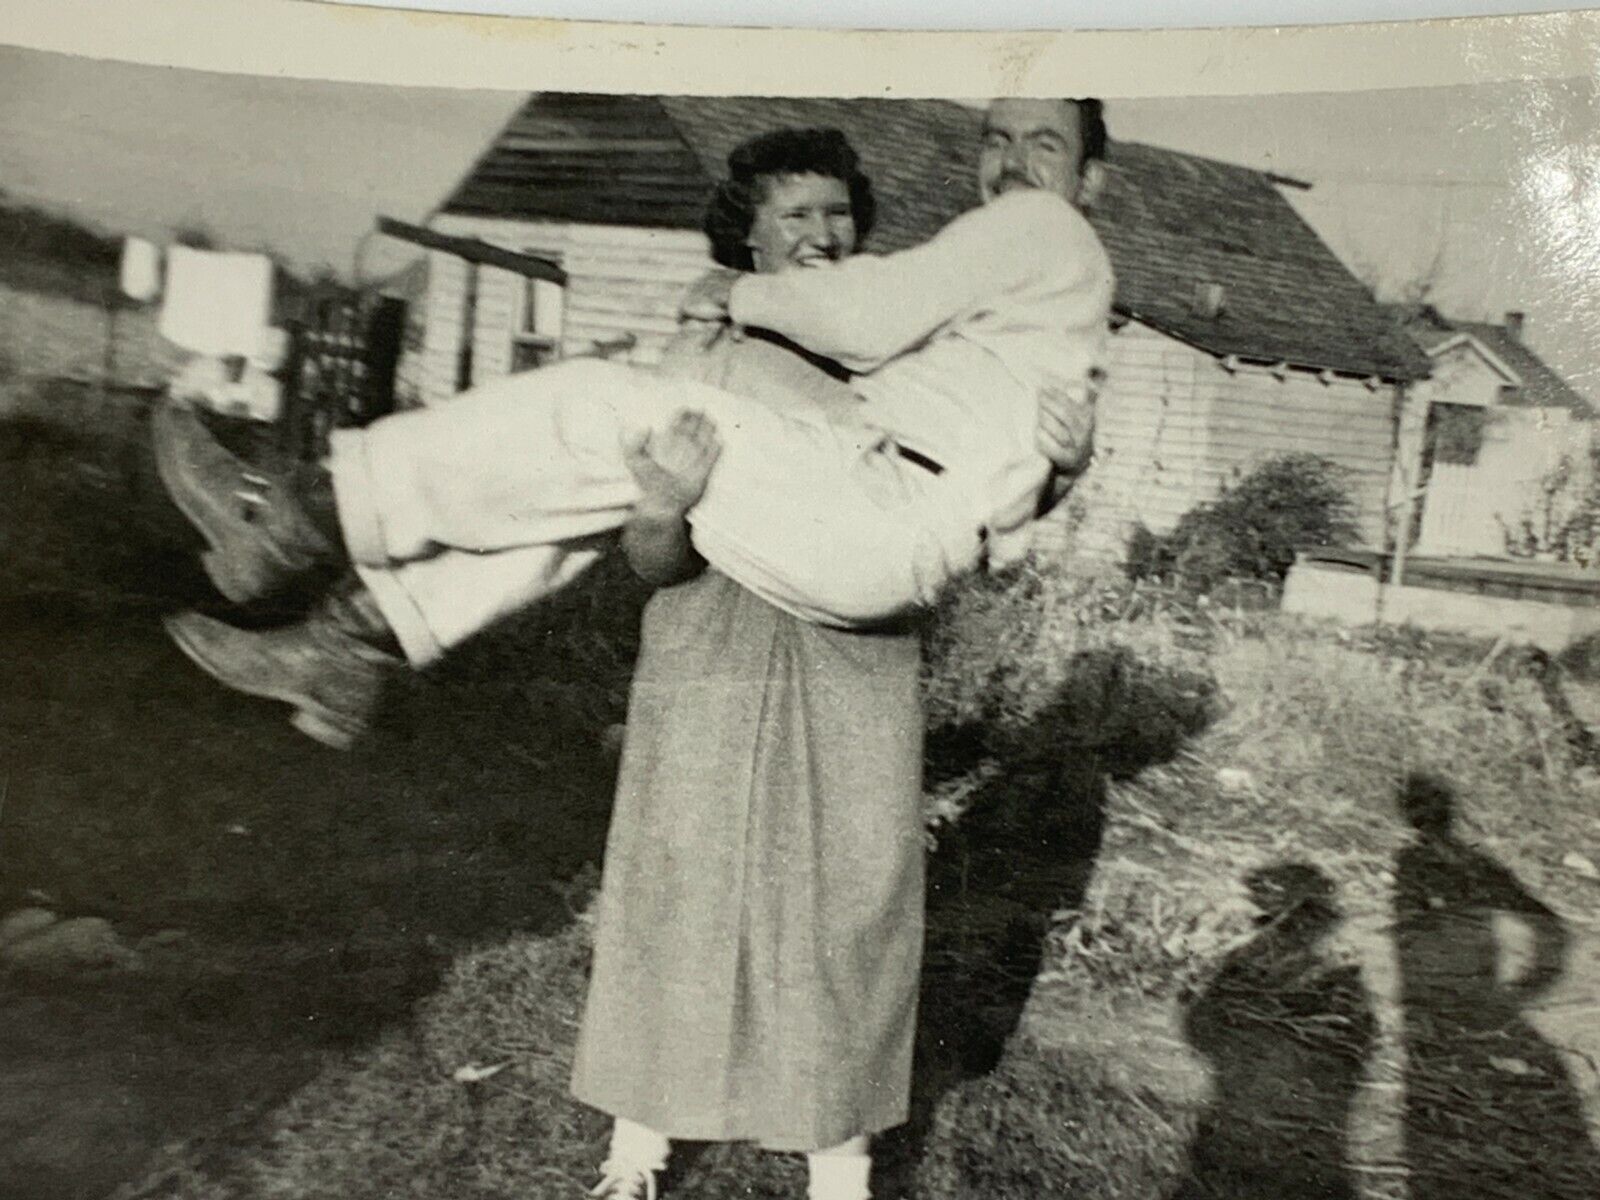 AgF) Found Photo Photograph Woman Picking Up Man Carrying Shadow People Odd